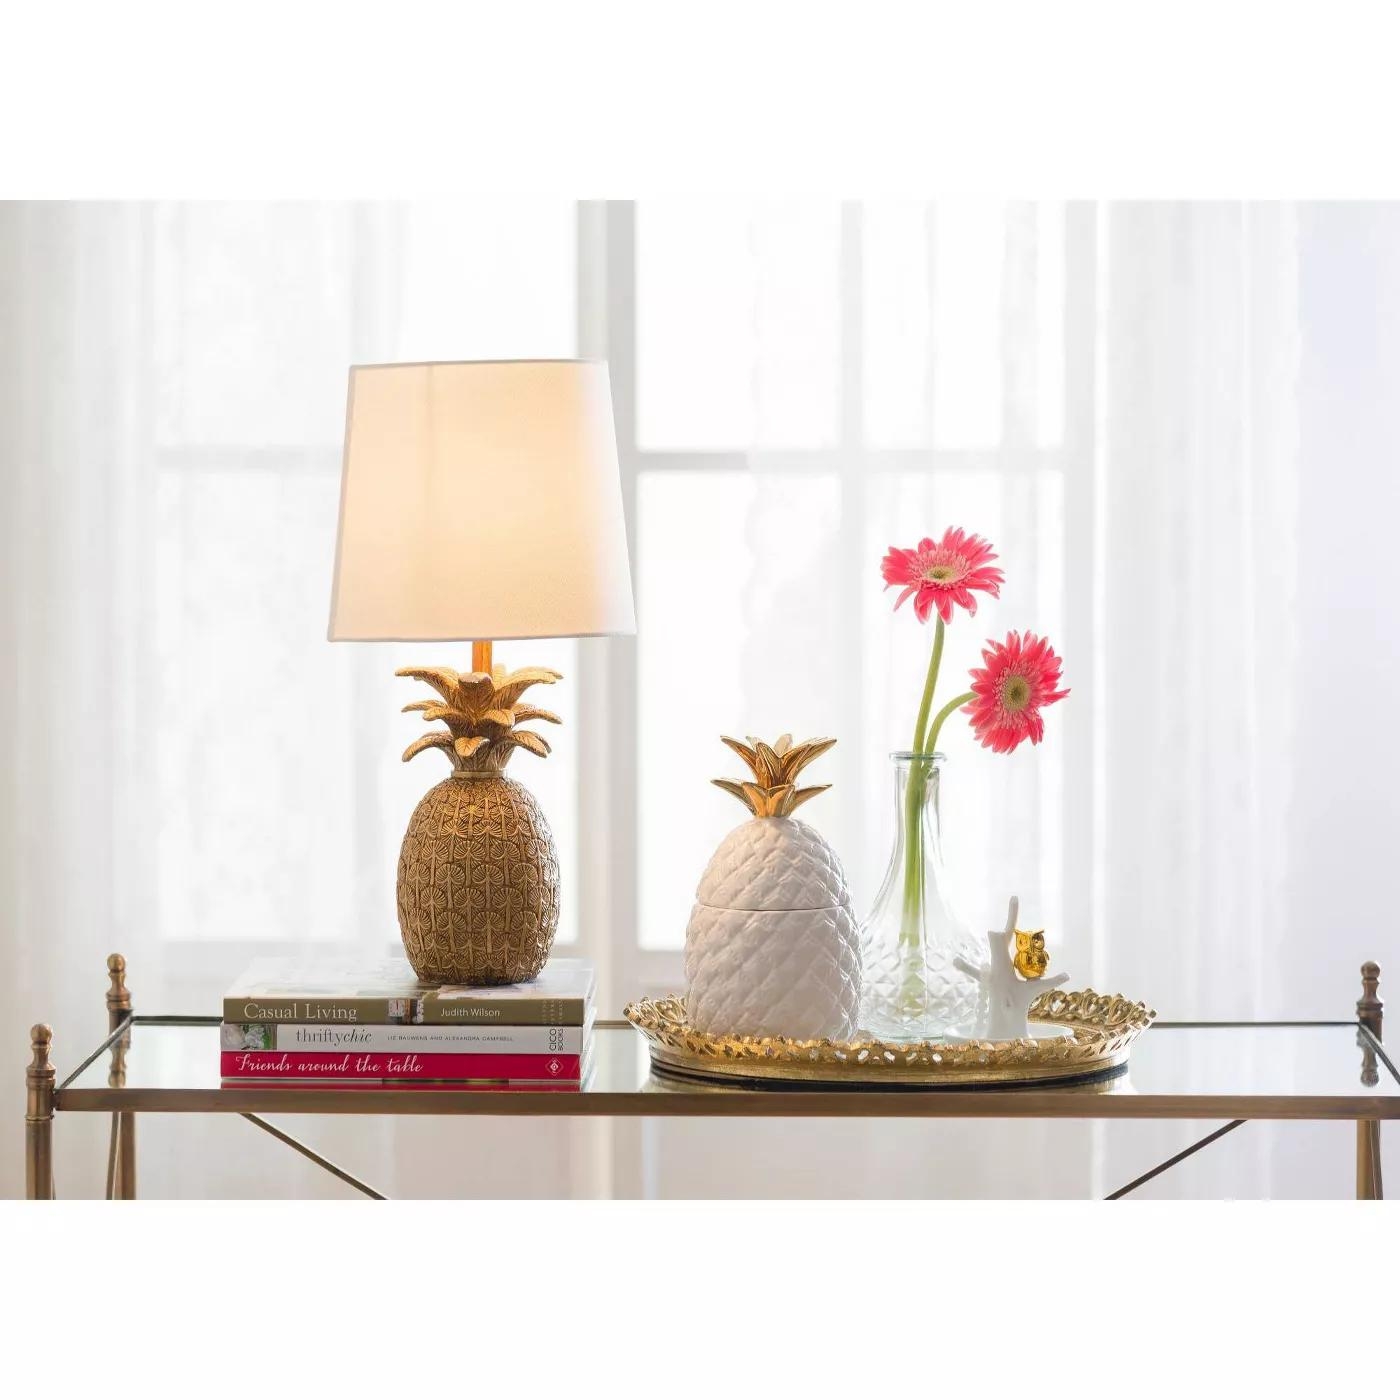 Resin Pineapple Shaped Table Lamp with Distressed Finish & Linen Shade - Image 2